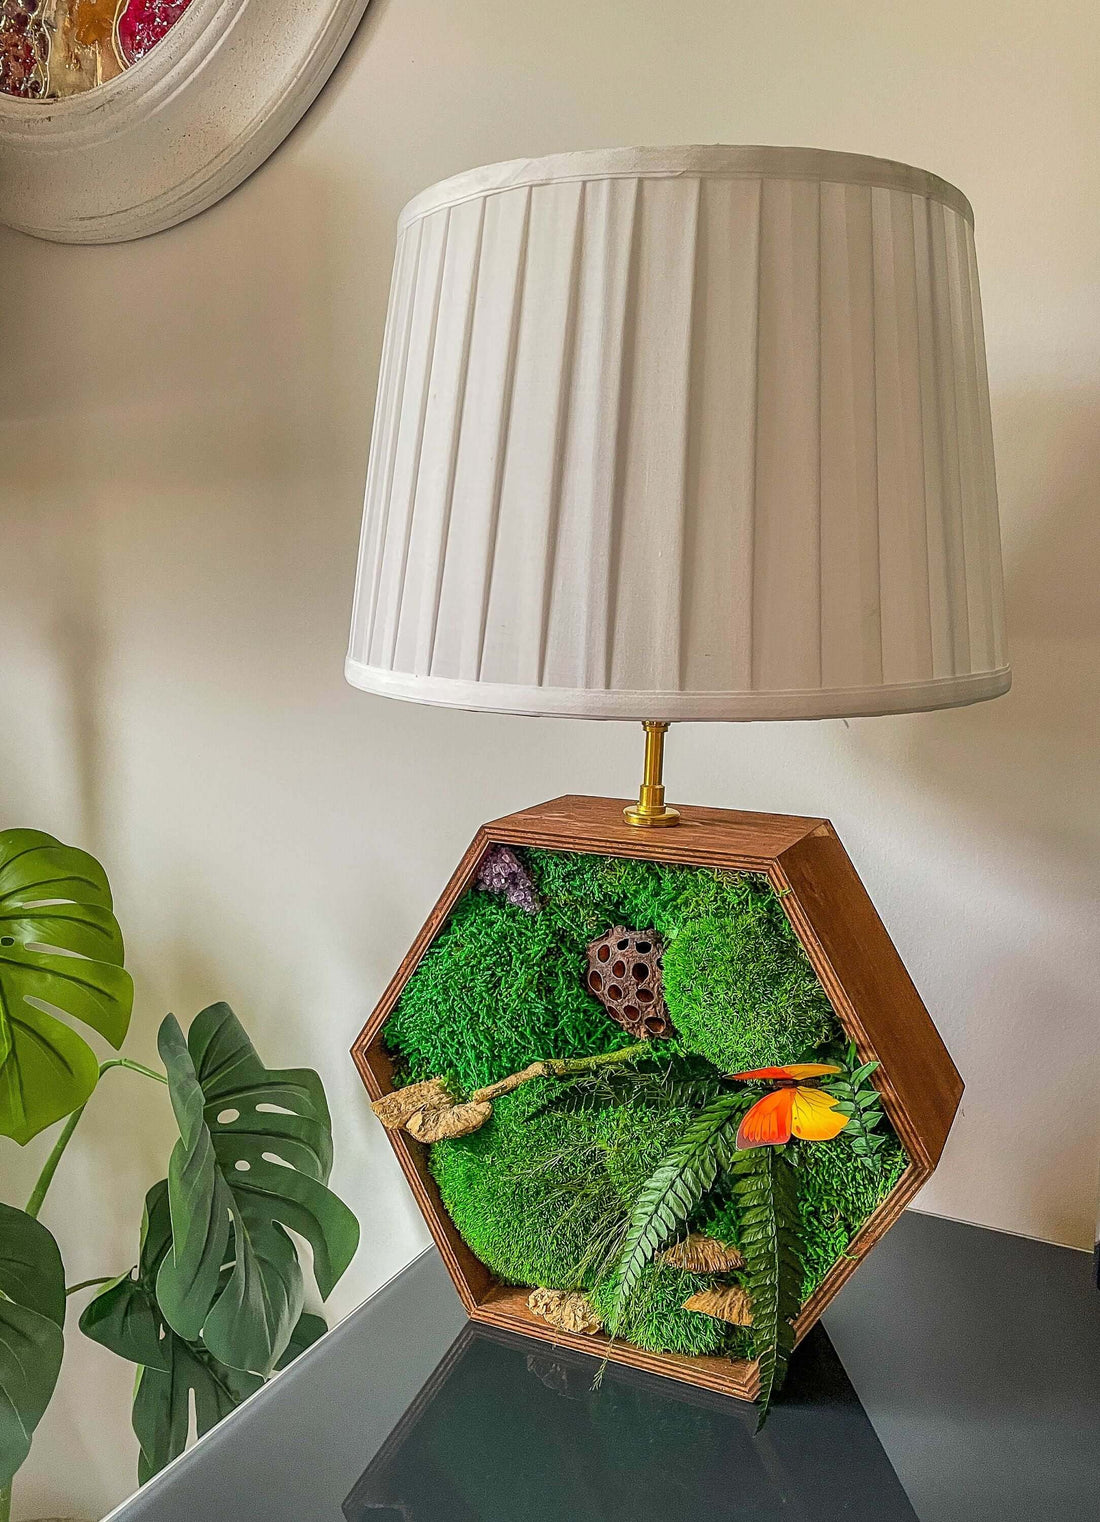 preserved moss lamp, Preserved green moss lamp, moss lamp, moss with light, artificial light for moss, Table beside wooden lamp, Wooden desk lamp, Wooden Hexagon lamp, wooden lamp base uk, rustic wooden lamp bases, living room lamps, quirky lamps